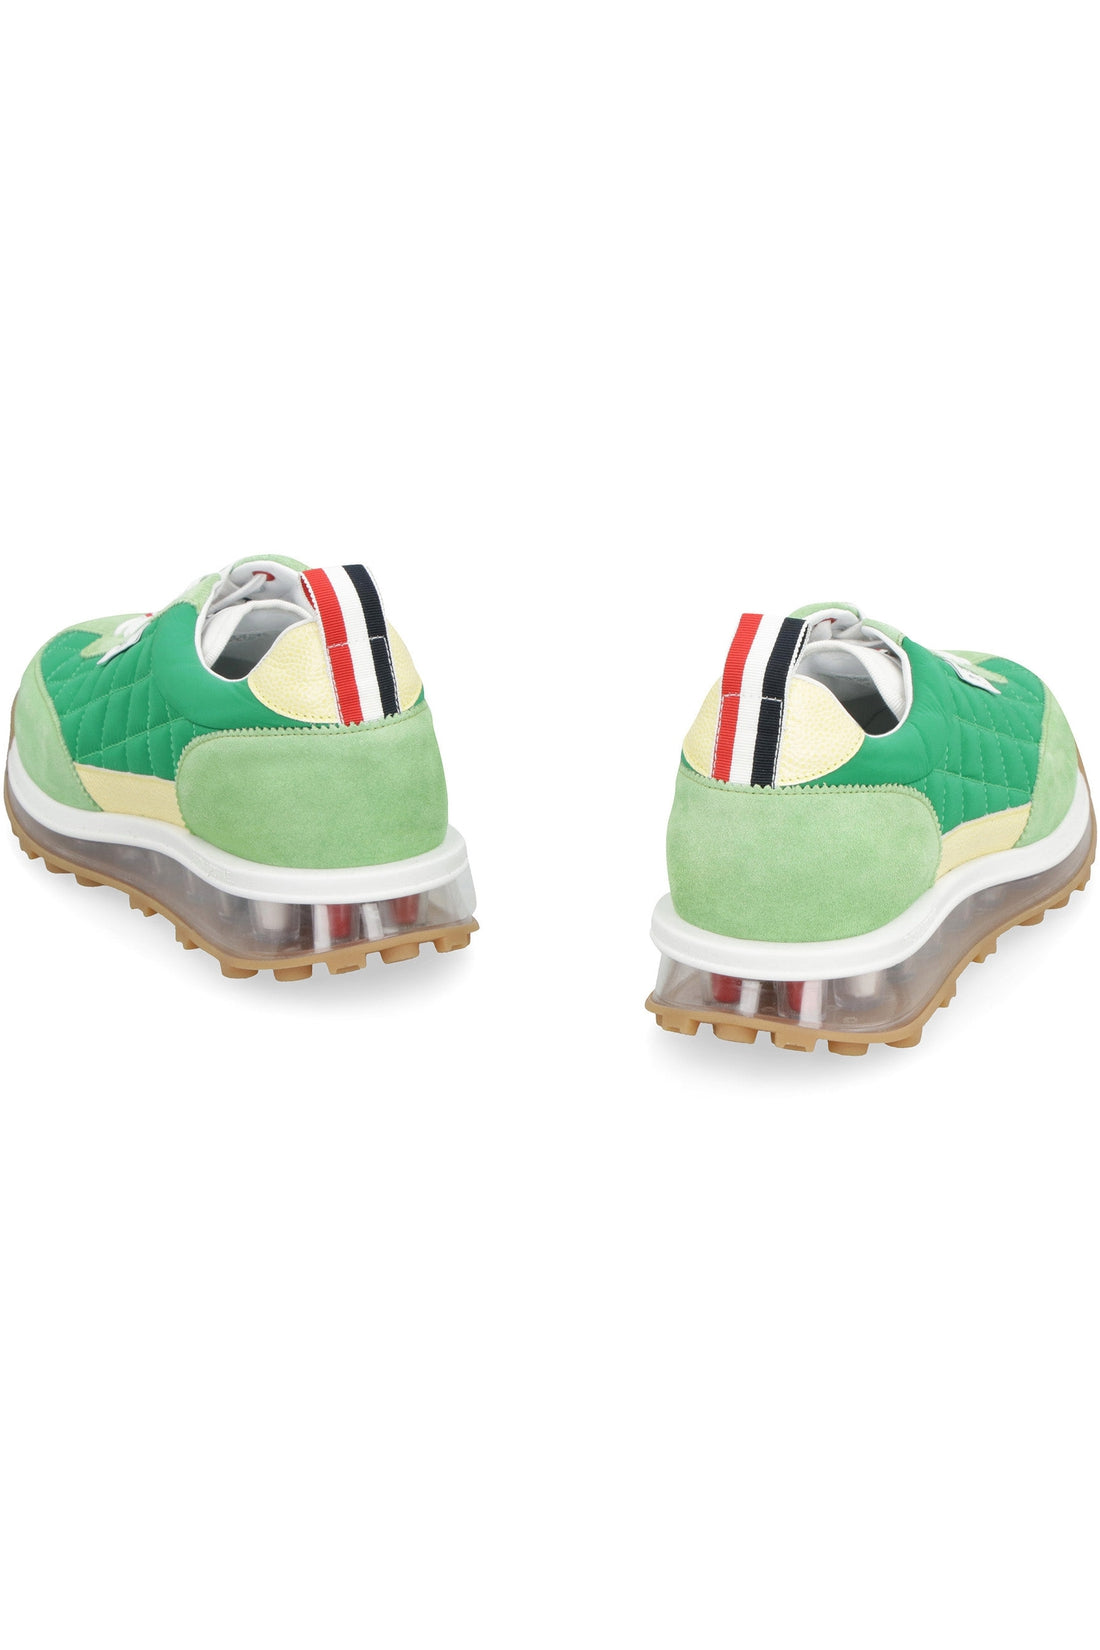 Thom Browne-OUTLET-SALE-Tech Runner low-top sneakers-ARCHIVIST